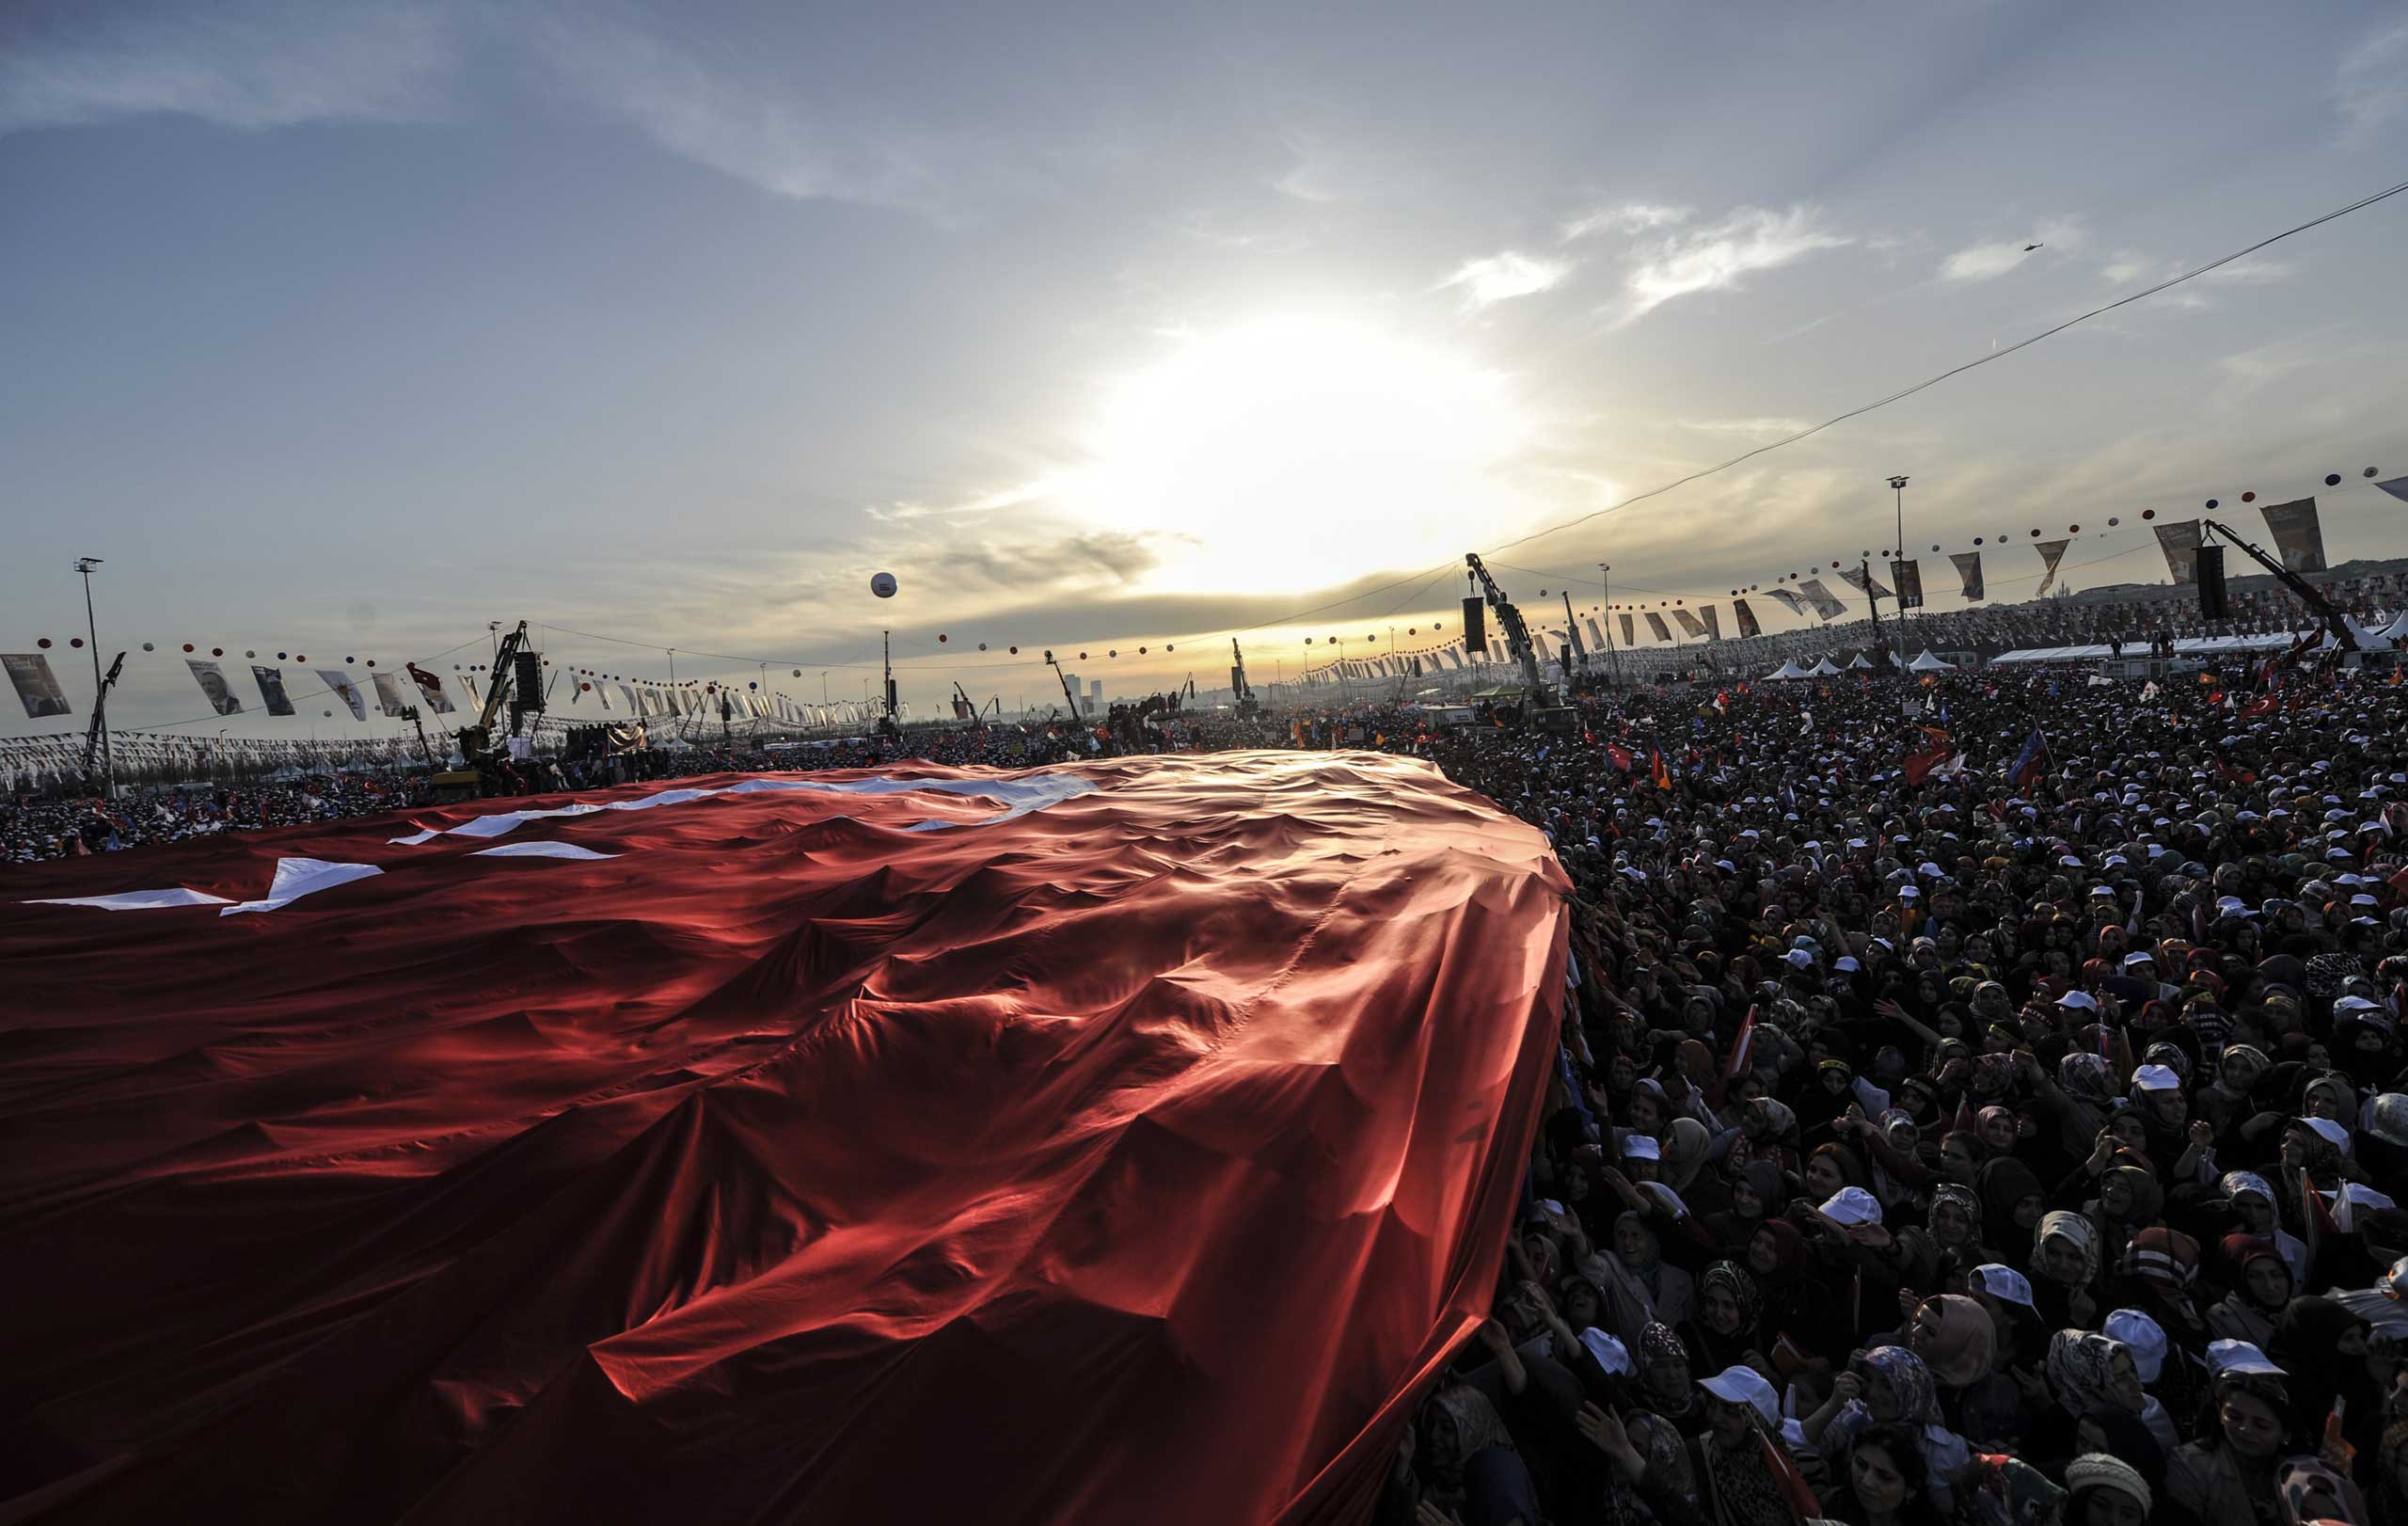 Supporters of Turkey's Prime Minister Tayyip Erdogan hold a giant Turkish flag during an election rally in Istanbul March 23, 2014.